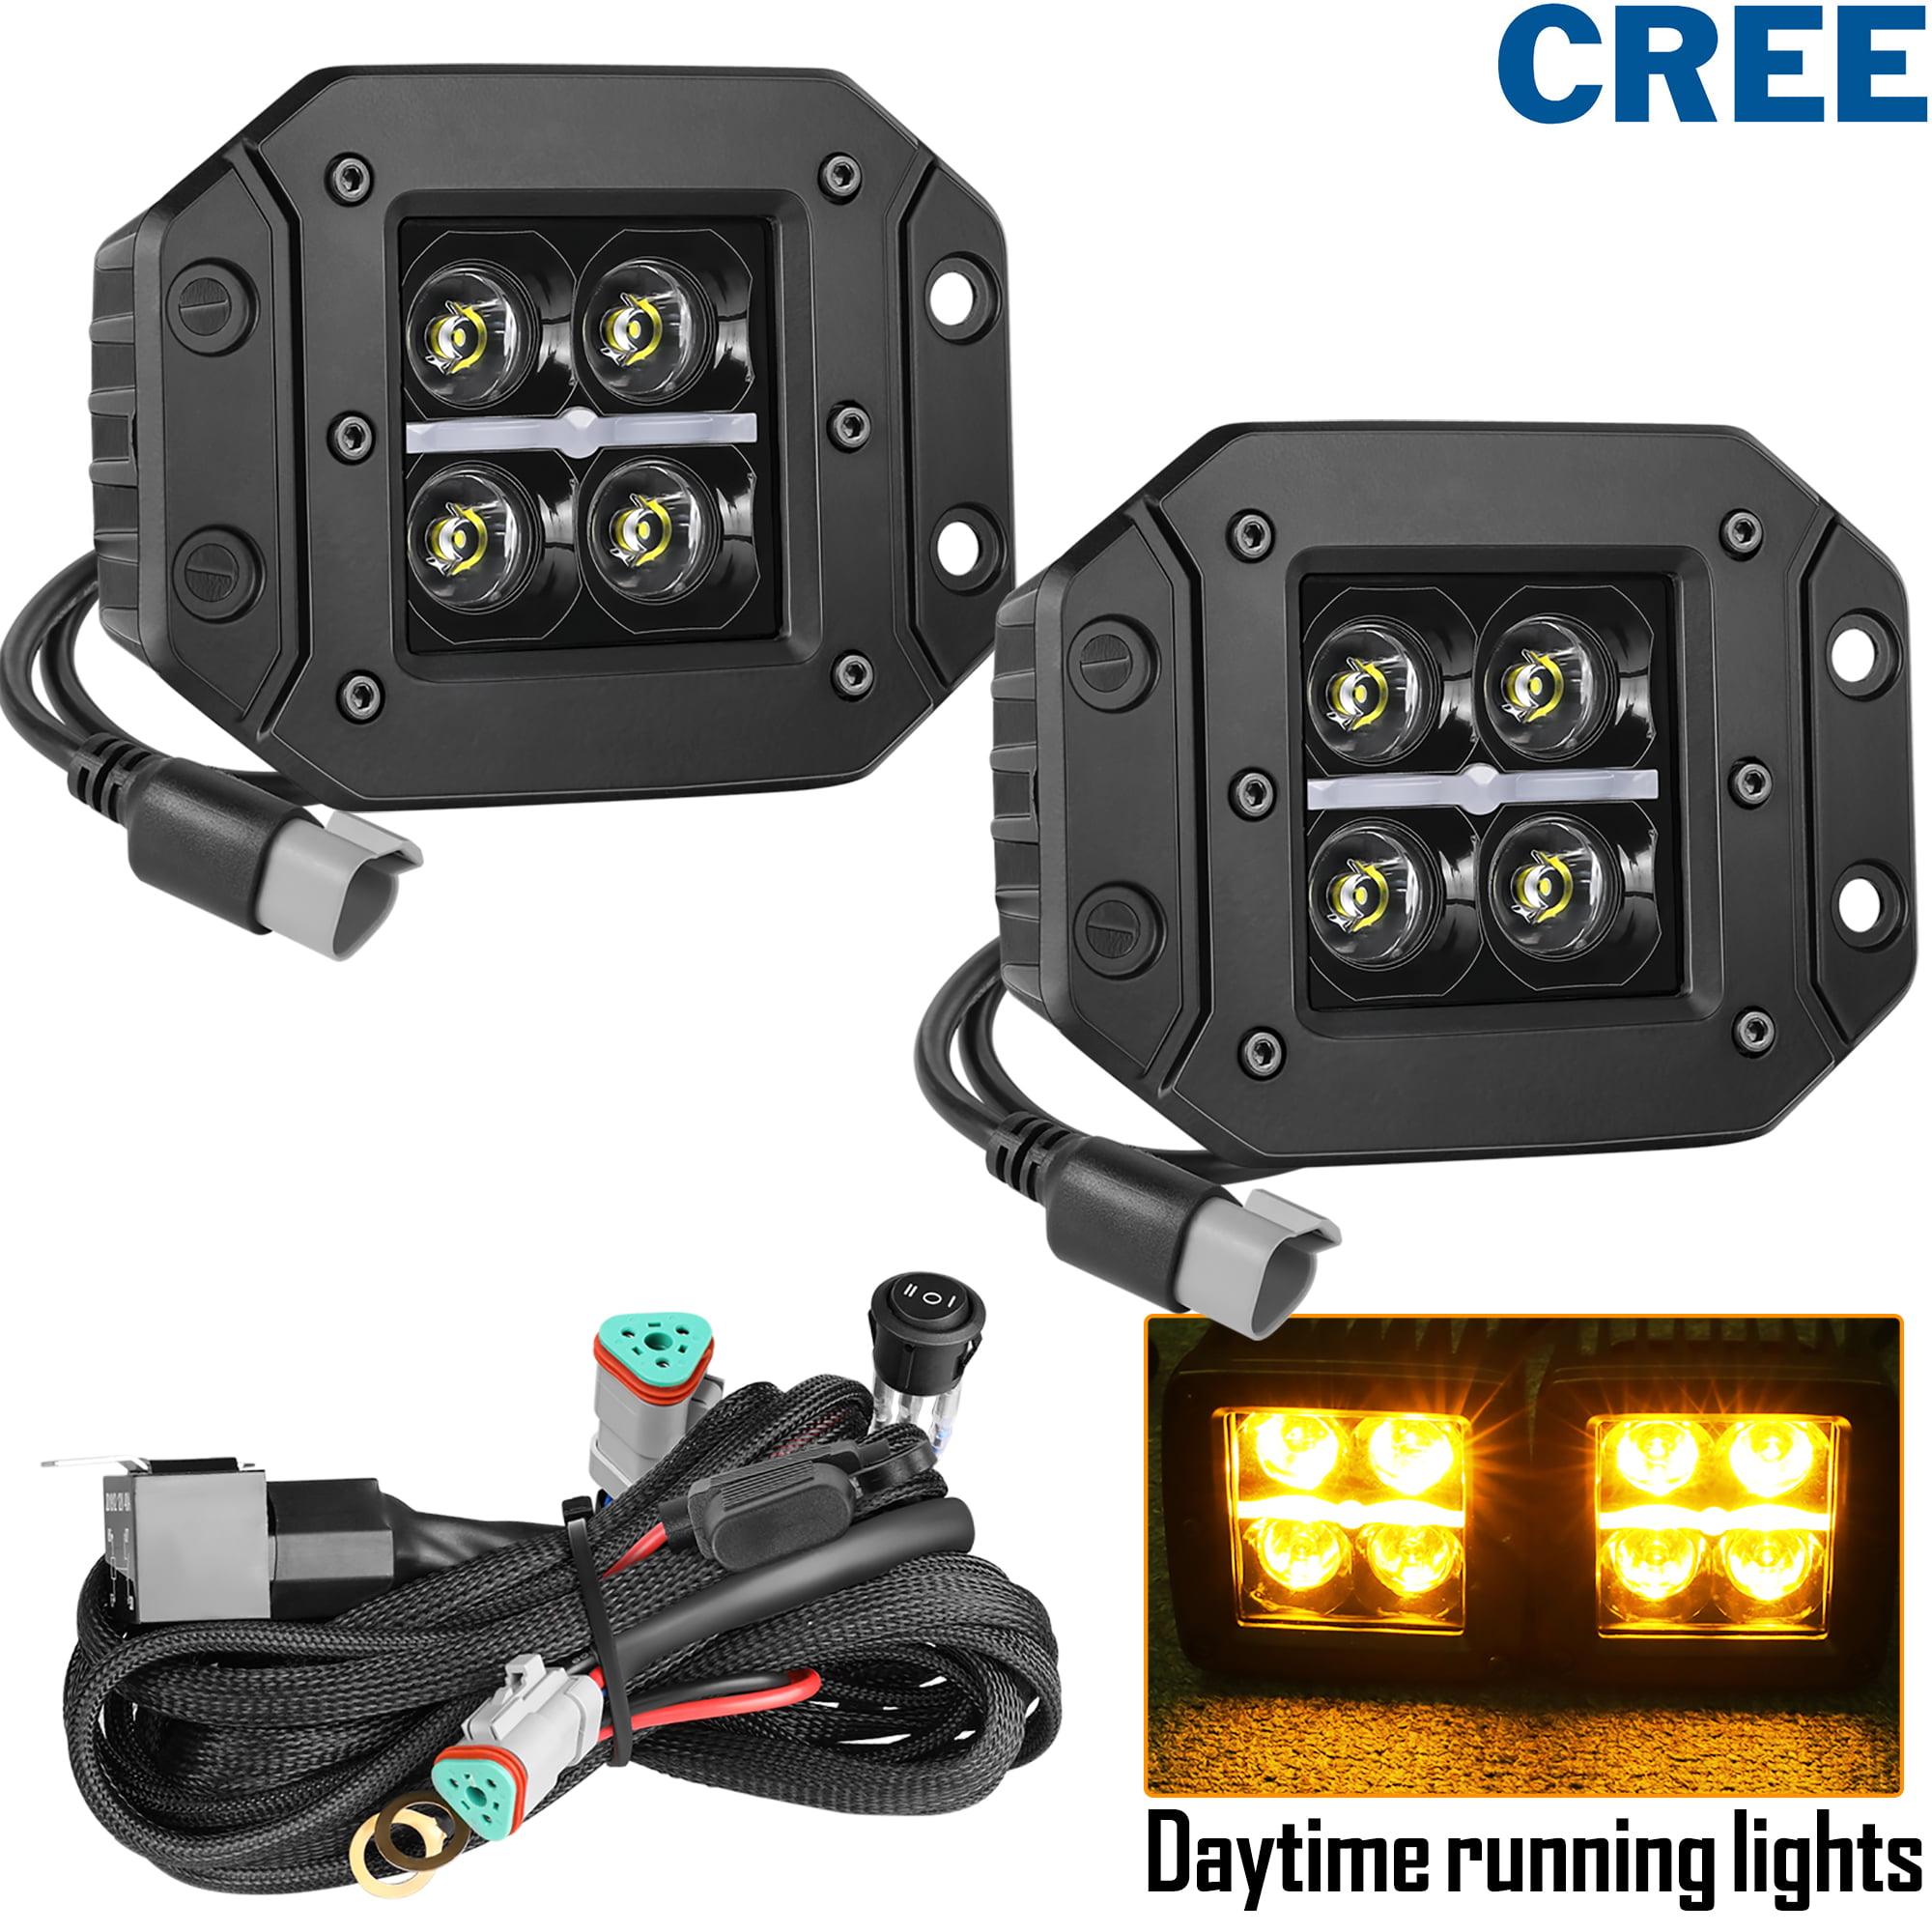 2X 8inch 36W Led Work Light Bar Spot Lamp Ford UTE Boat 4WD Driving 4x4 Truck 